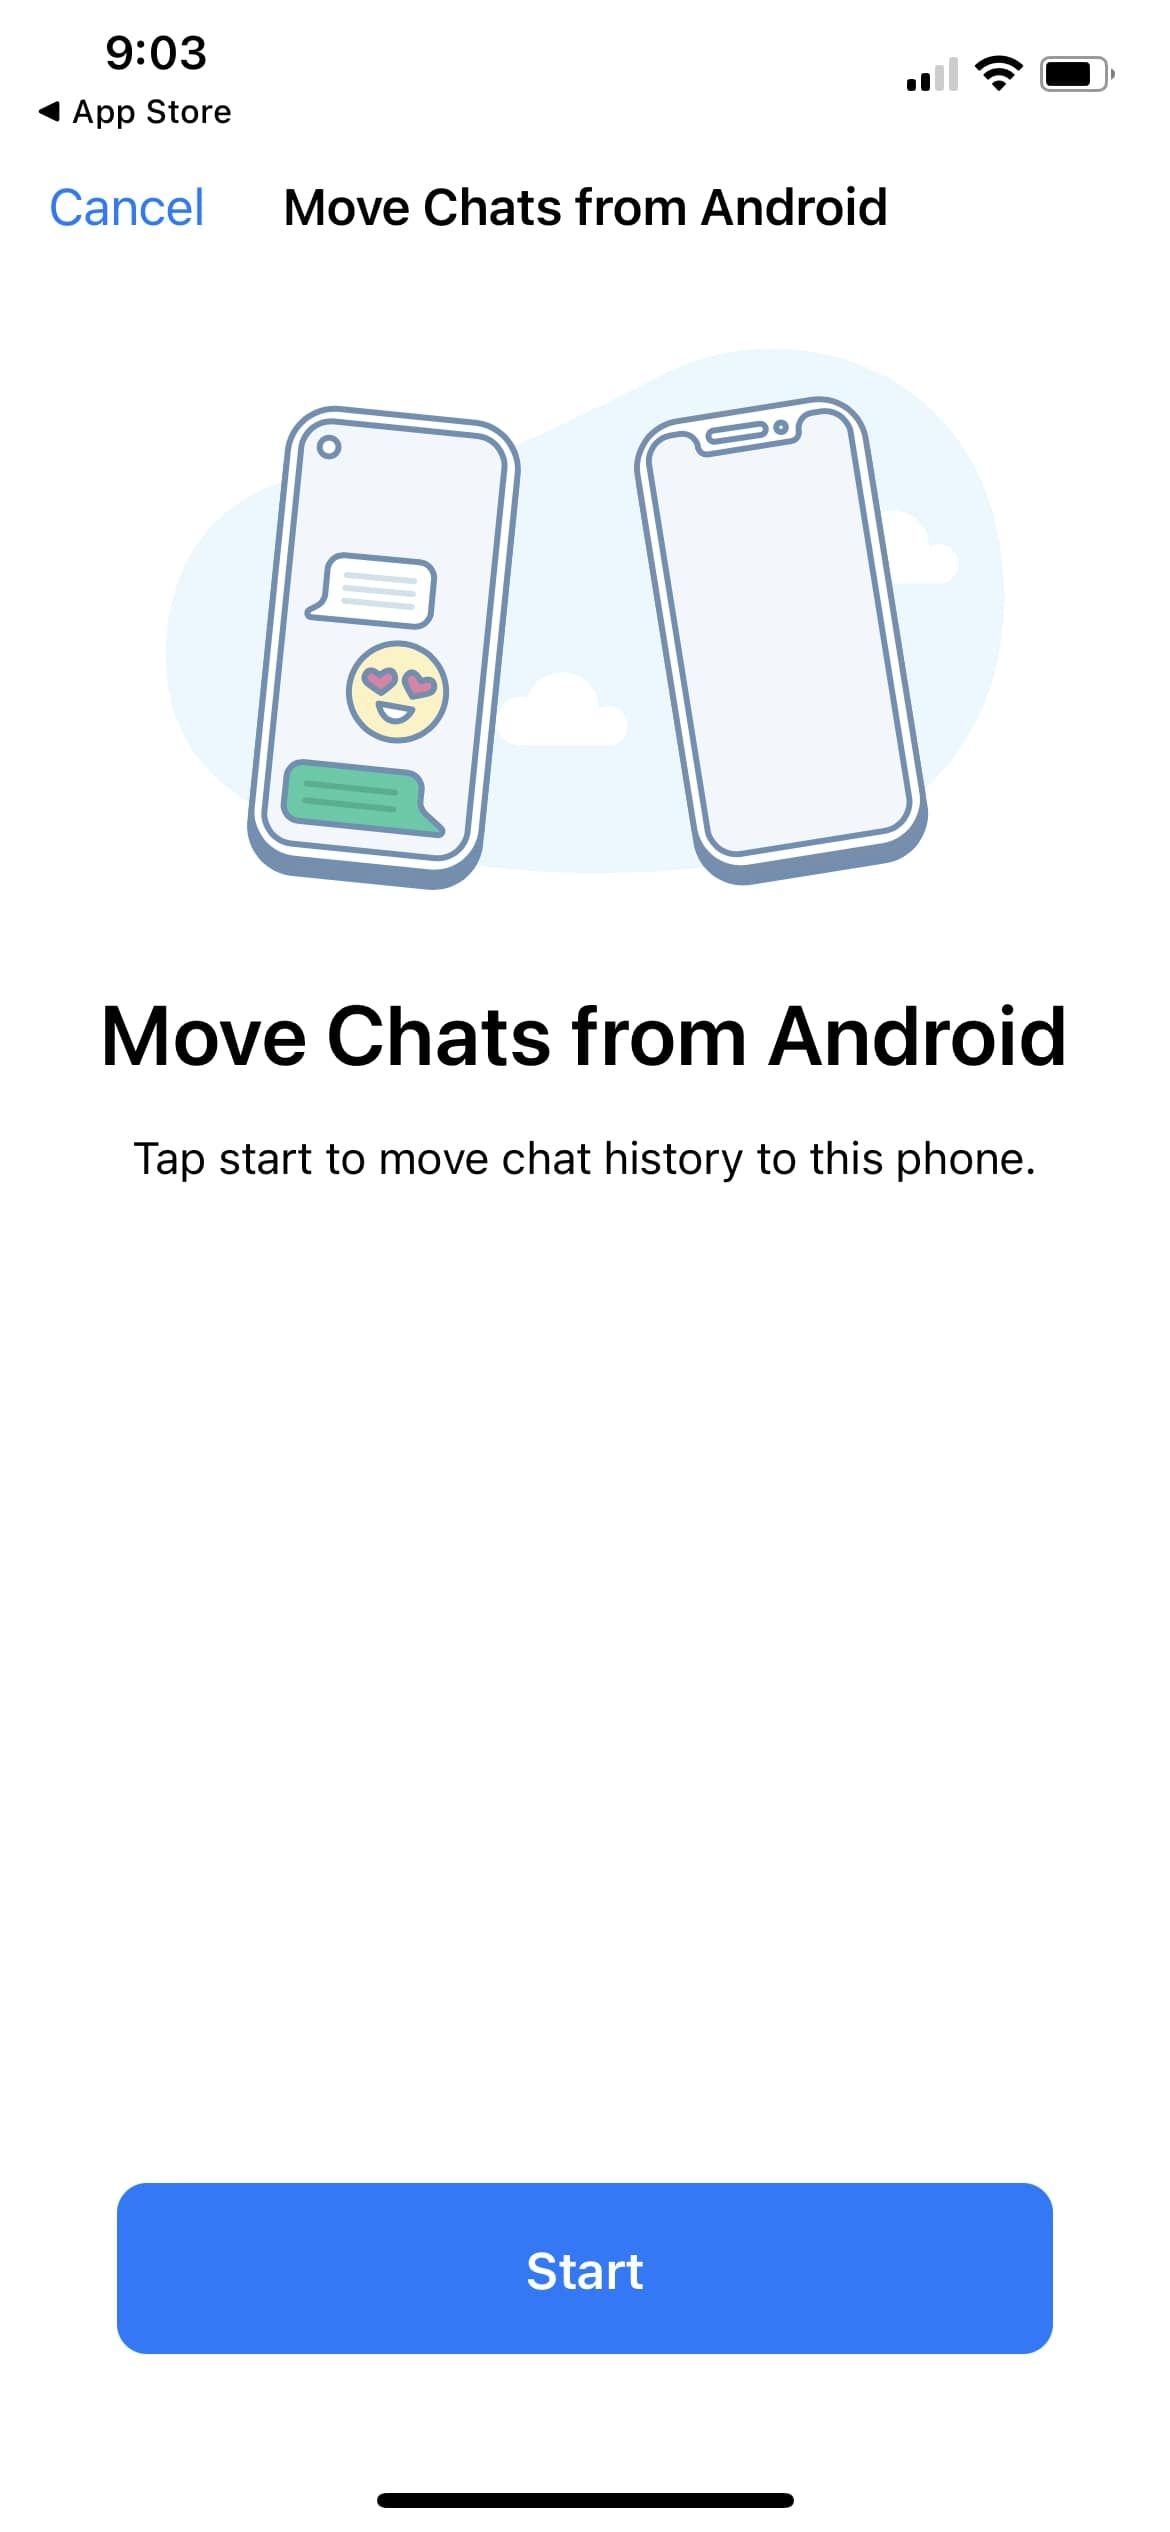 move chats from android screen on whatsapp iphone app